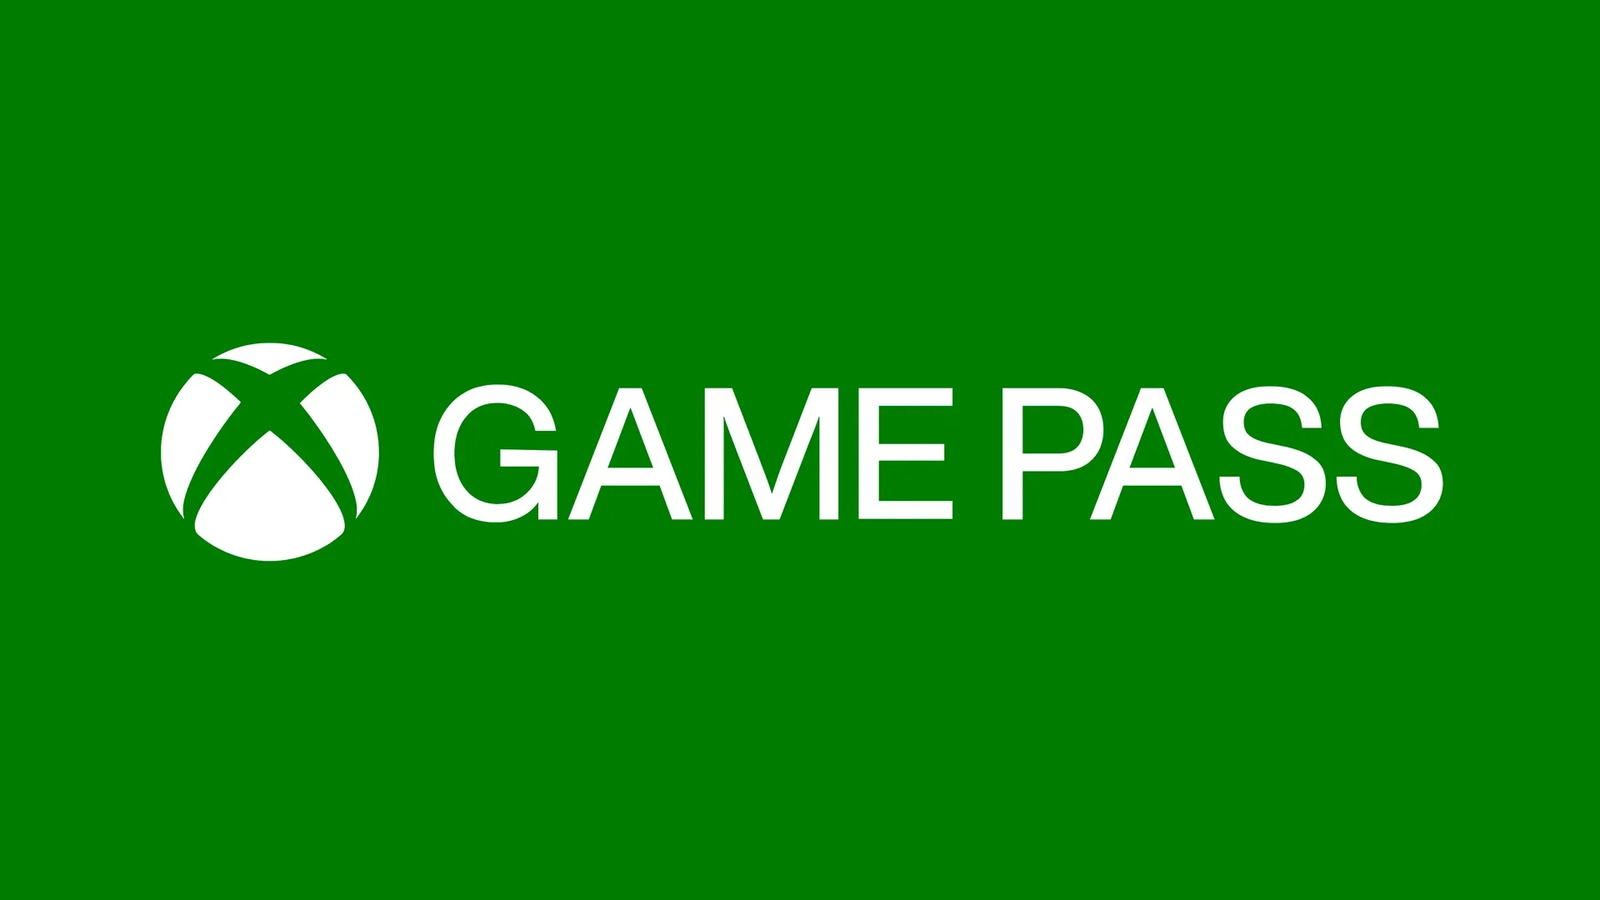 Affordable robux gamepass For Sale, In-Game Products